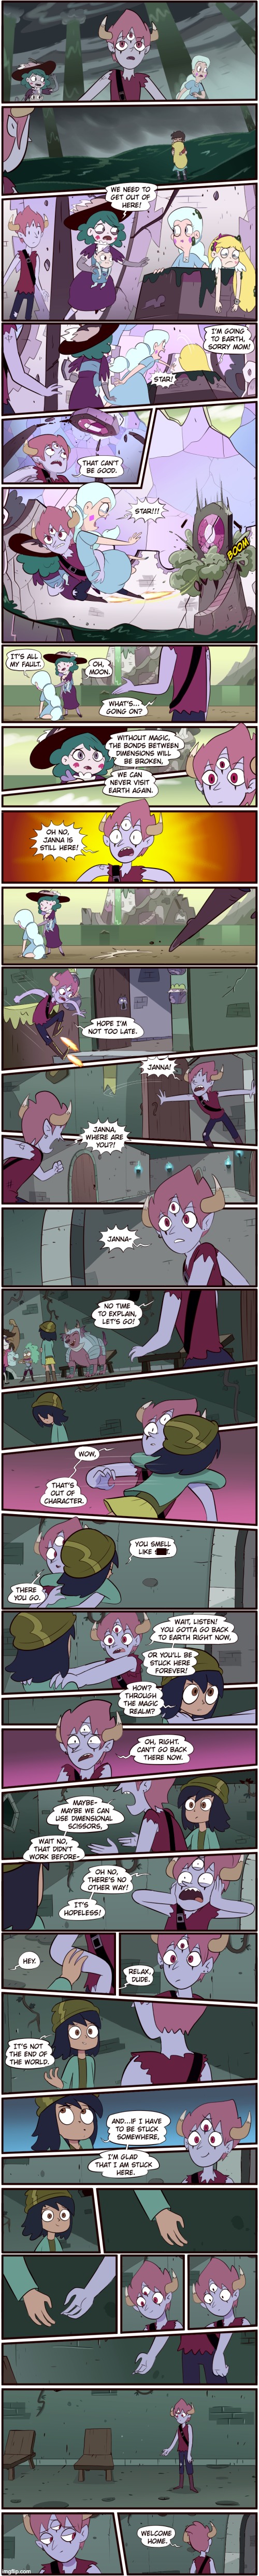 Tom vs Jannanigans: Hell-bent (Part 5) (Comments Turned off JUST IN CASE if The Comments are gonna be a Mess.) | image tagged in morningmark,svtfoe,comics/cartoons,star vs the forces of evil,comics,memes | made w/ Imgflip meme maker